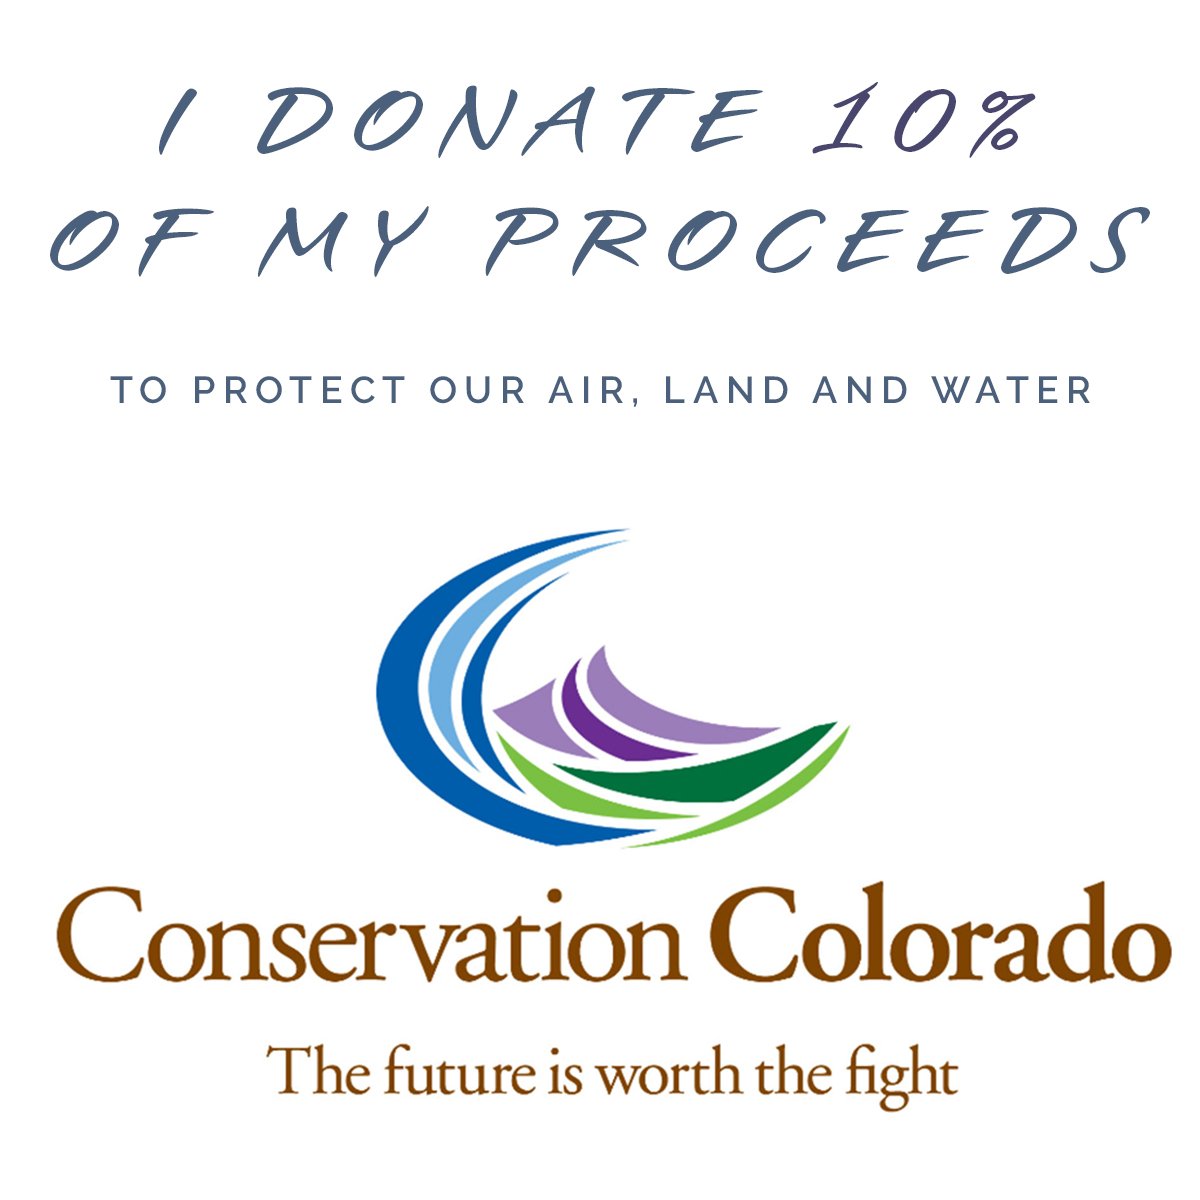 As a Green Leadership Business Partner, handmade, eco-friendly Earth Song Jewelry donates 10% of proceeds to Conservation Colorado